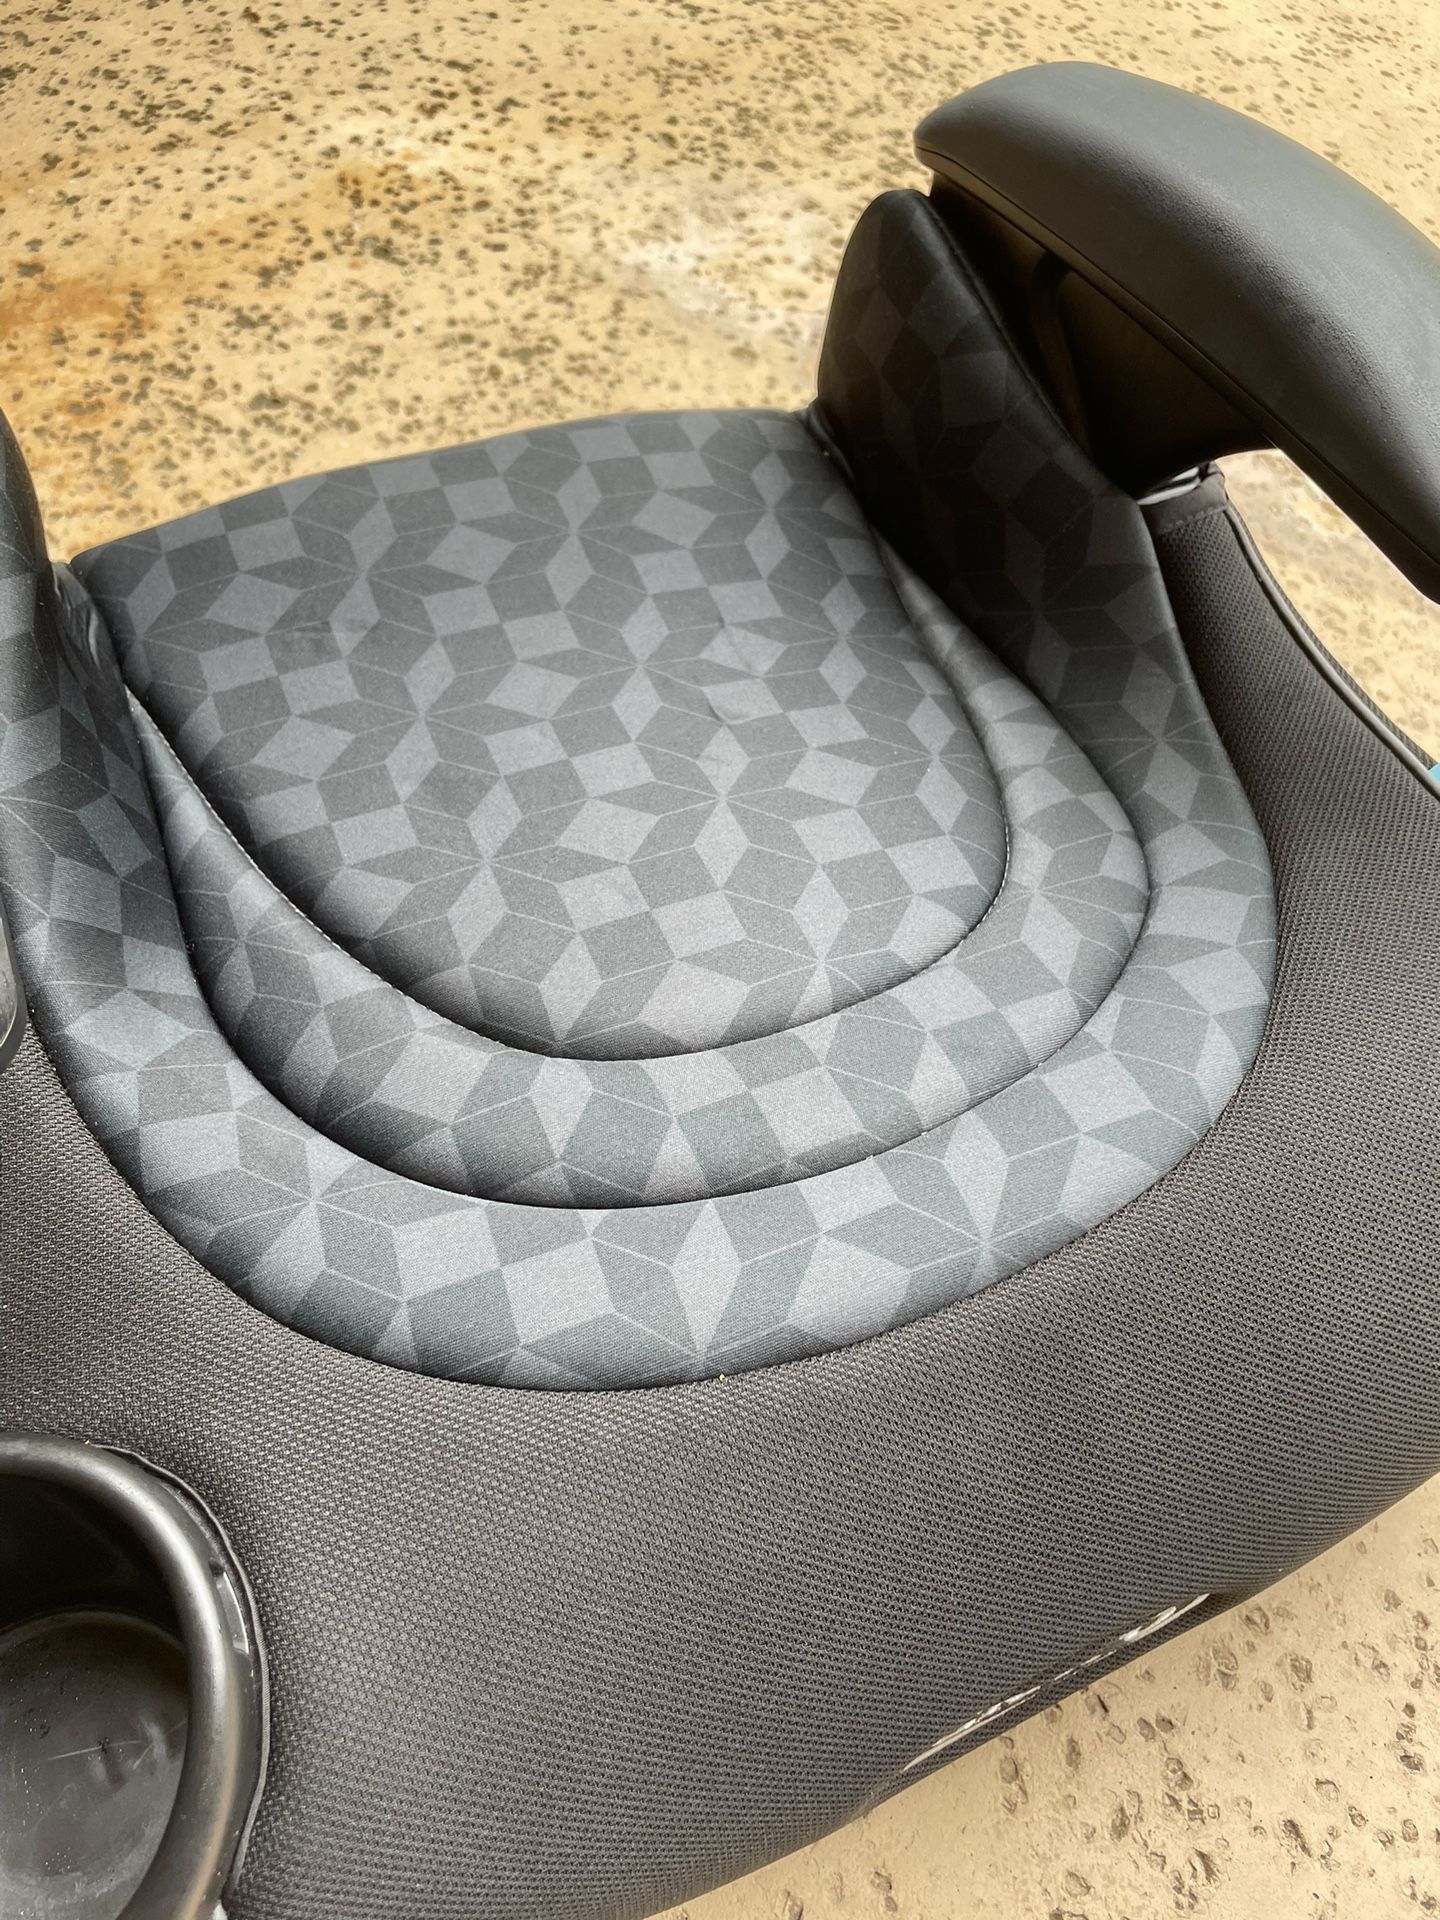 Graco® TurboBooster® LX Backless Booster with Affix Latch | Backless Booster Seat for Big Kids 